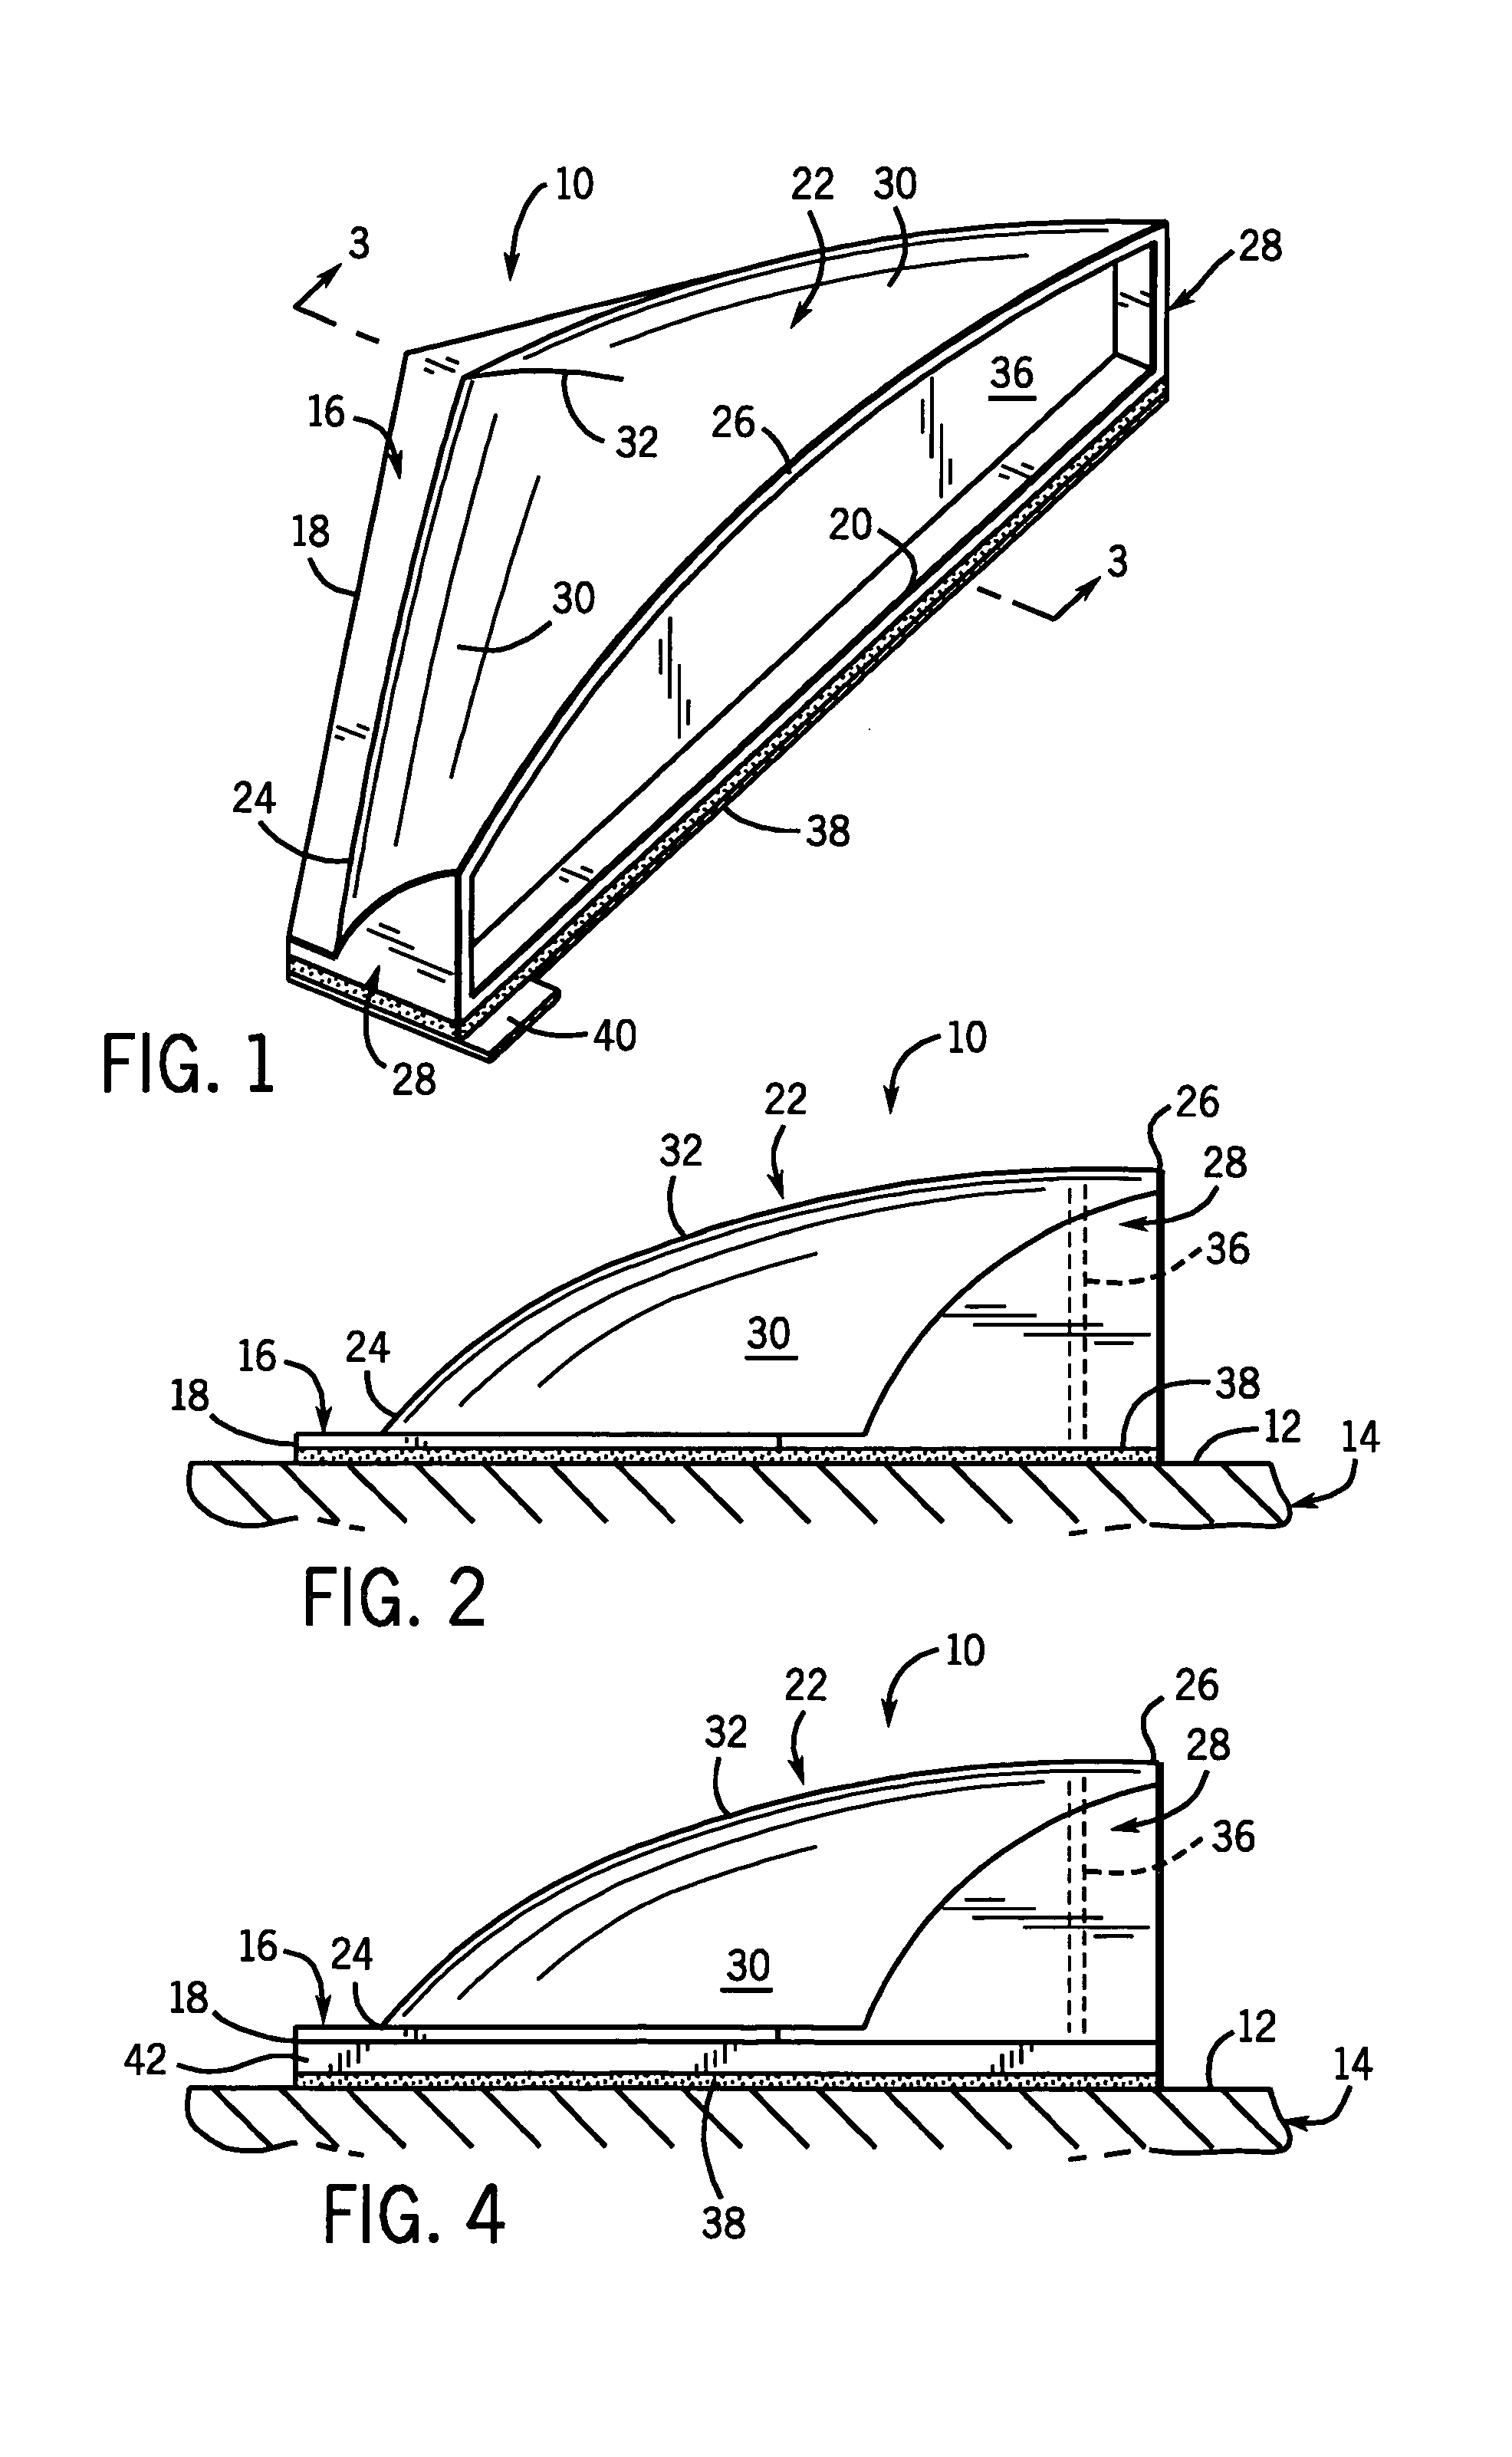 Dynamic surface element for bodies moving through a fluid